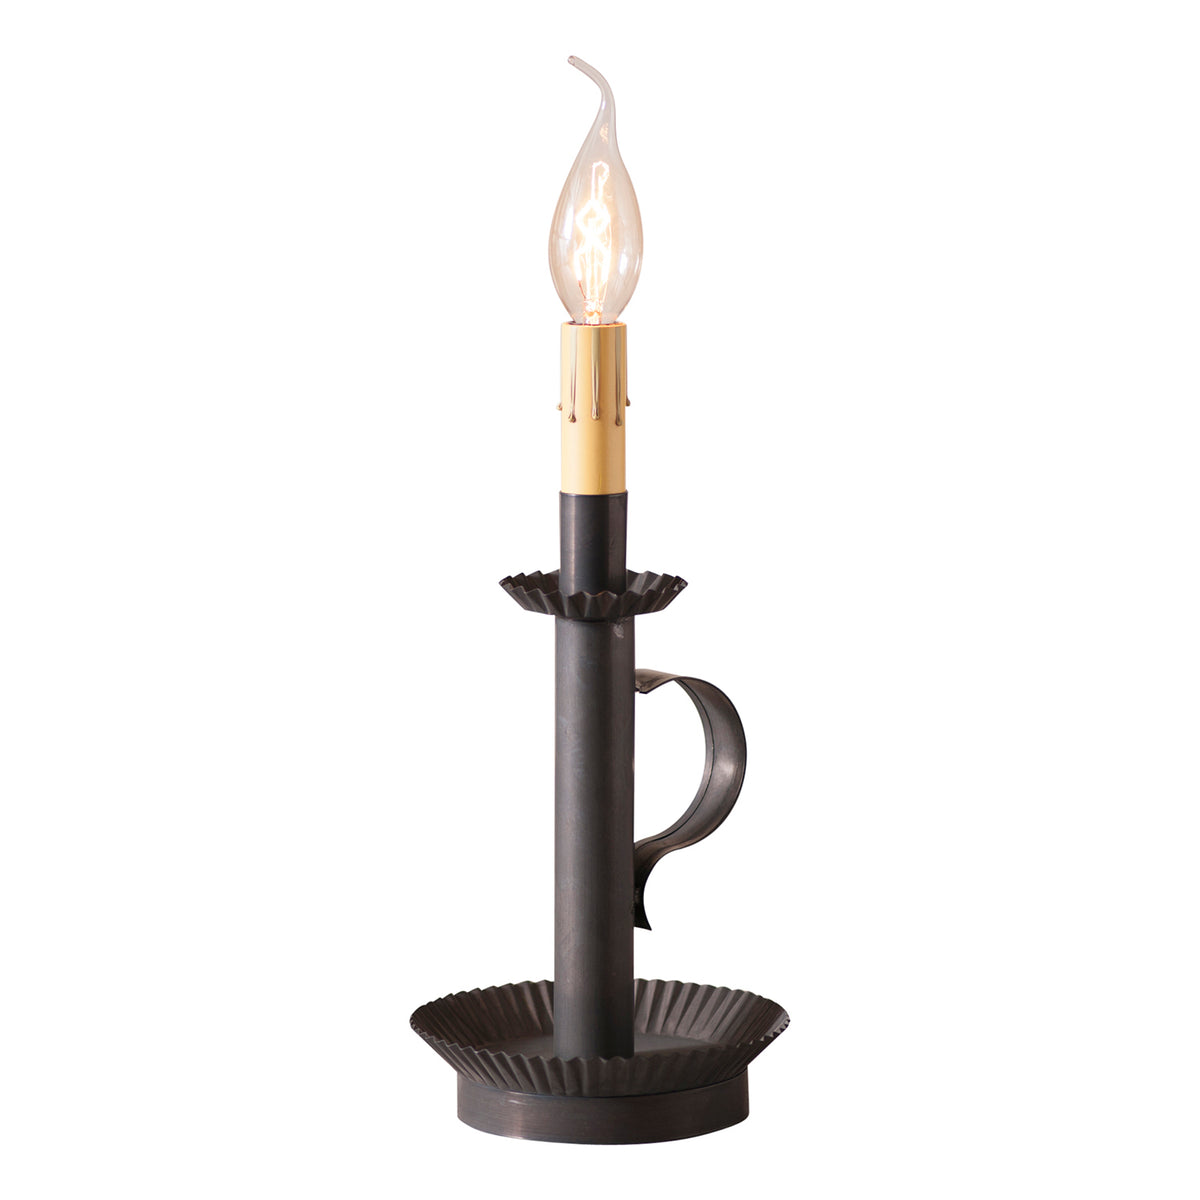 Candlestick Accent Light in Blackened Tin